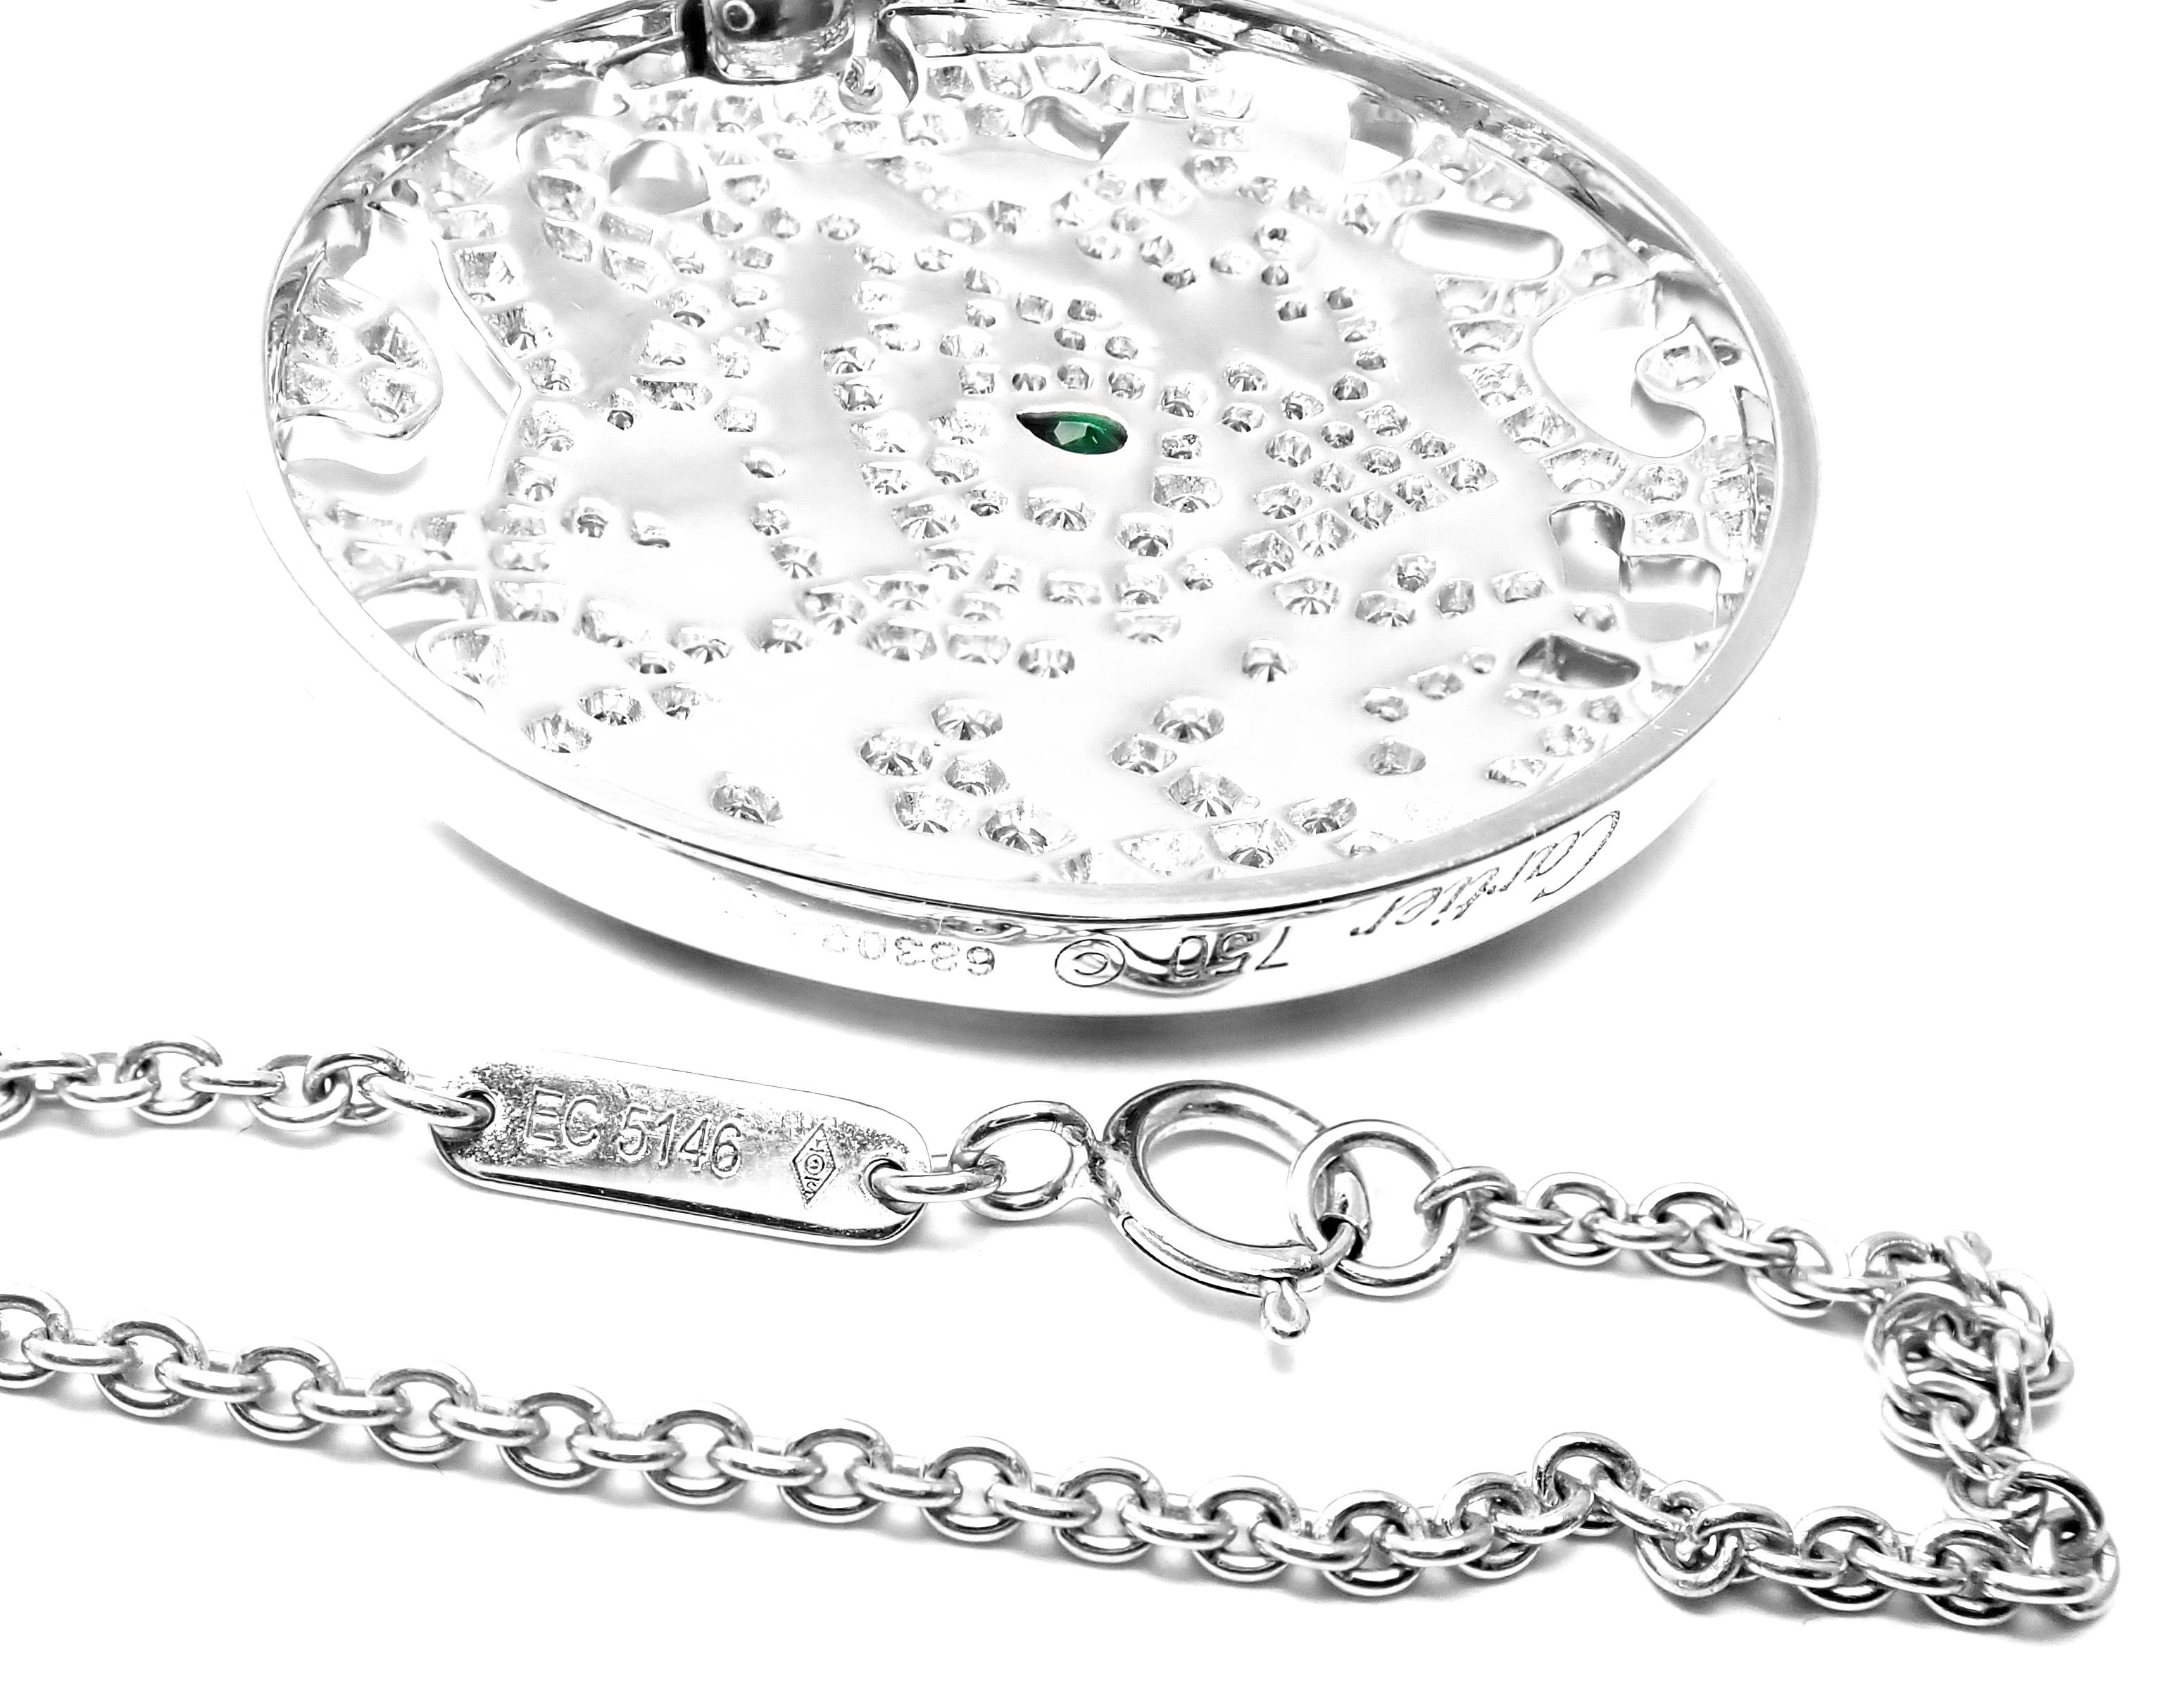 Cartier Panther Diamond Emerald White Gold Pendant Necklace 5